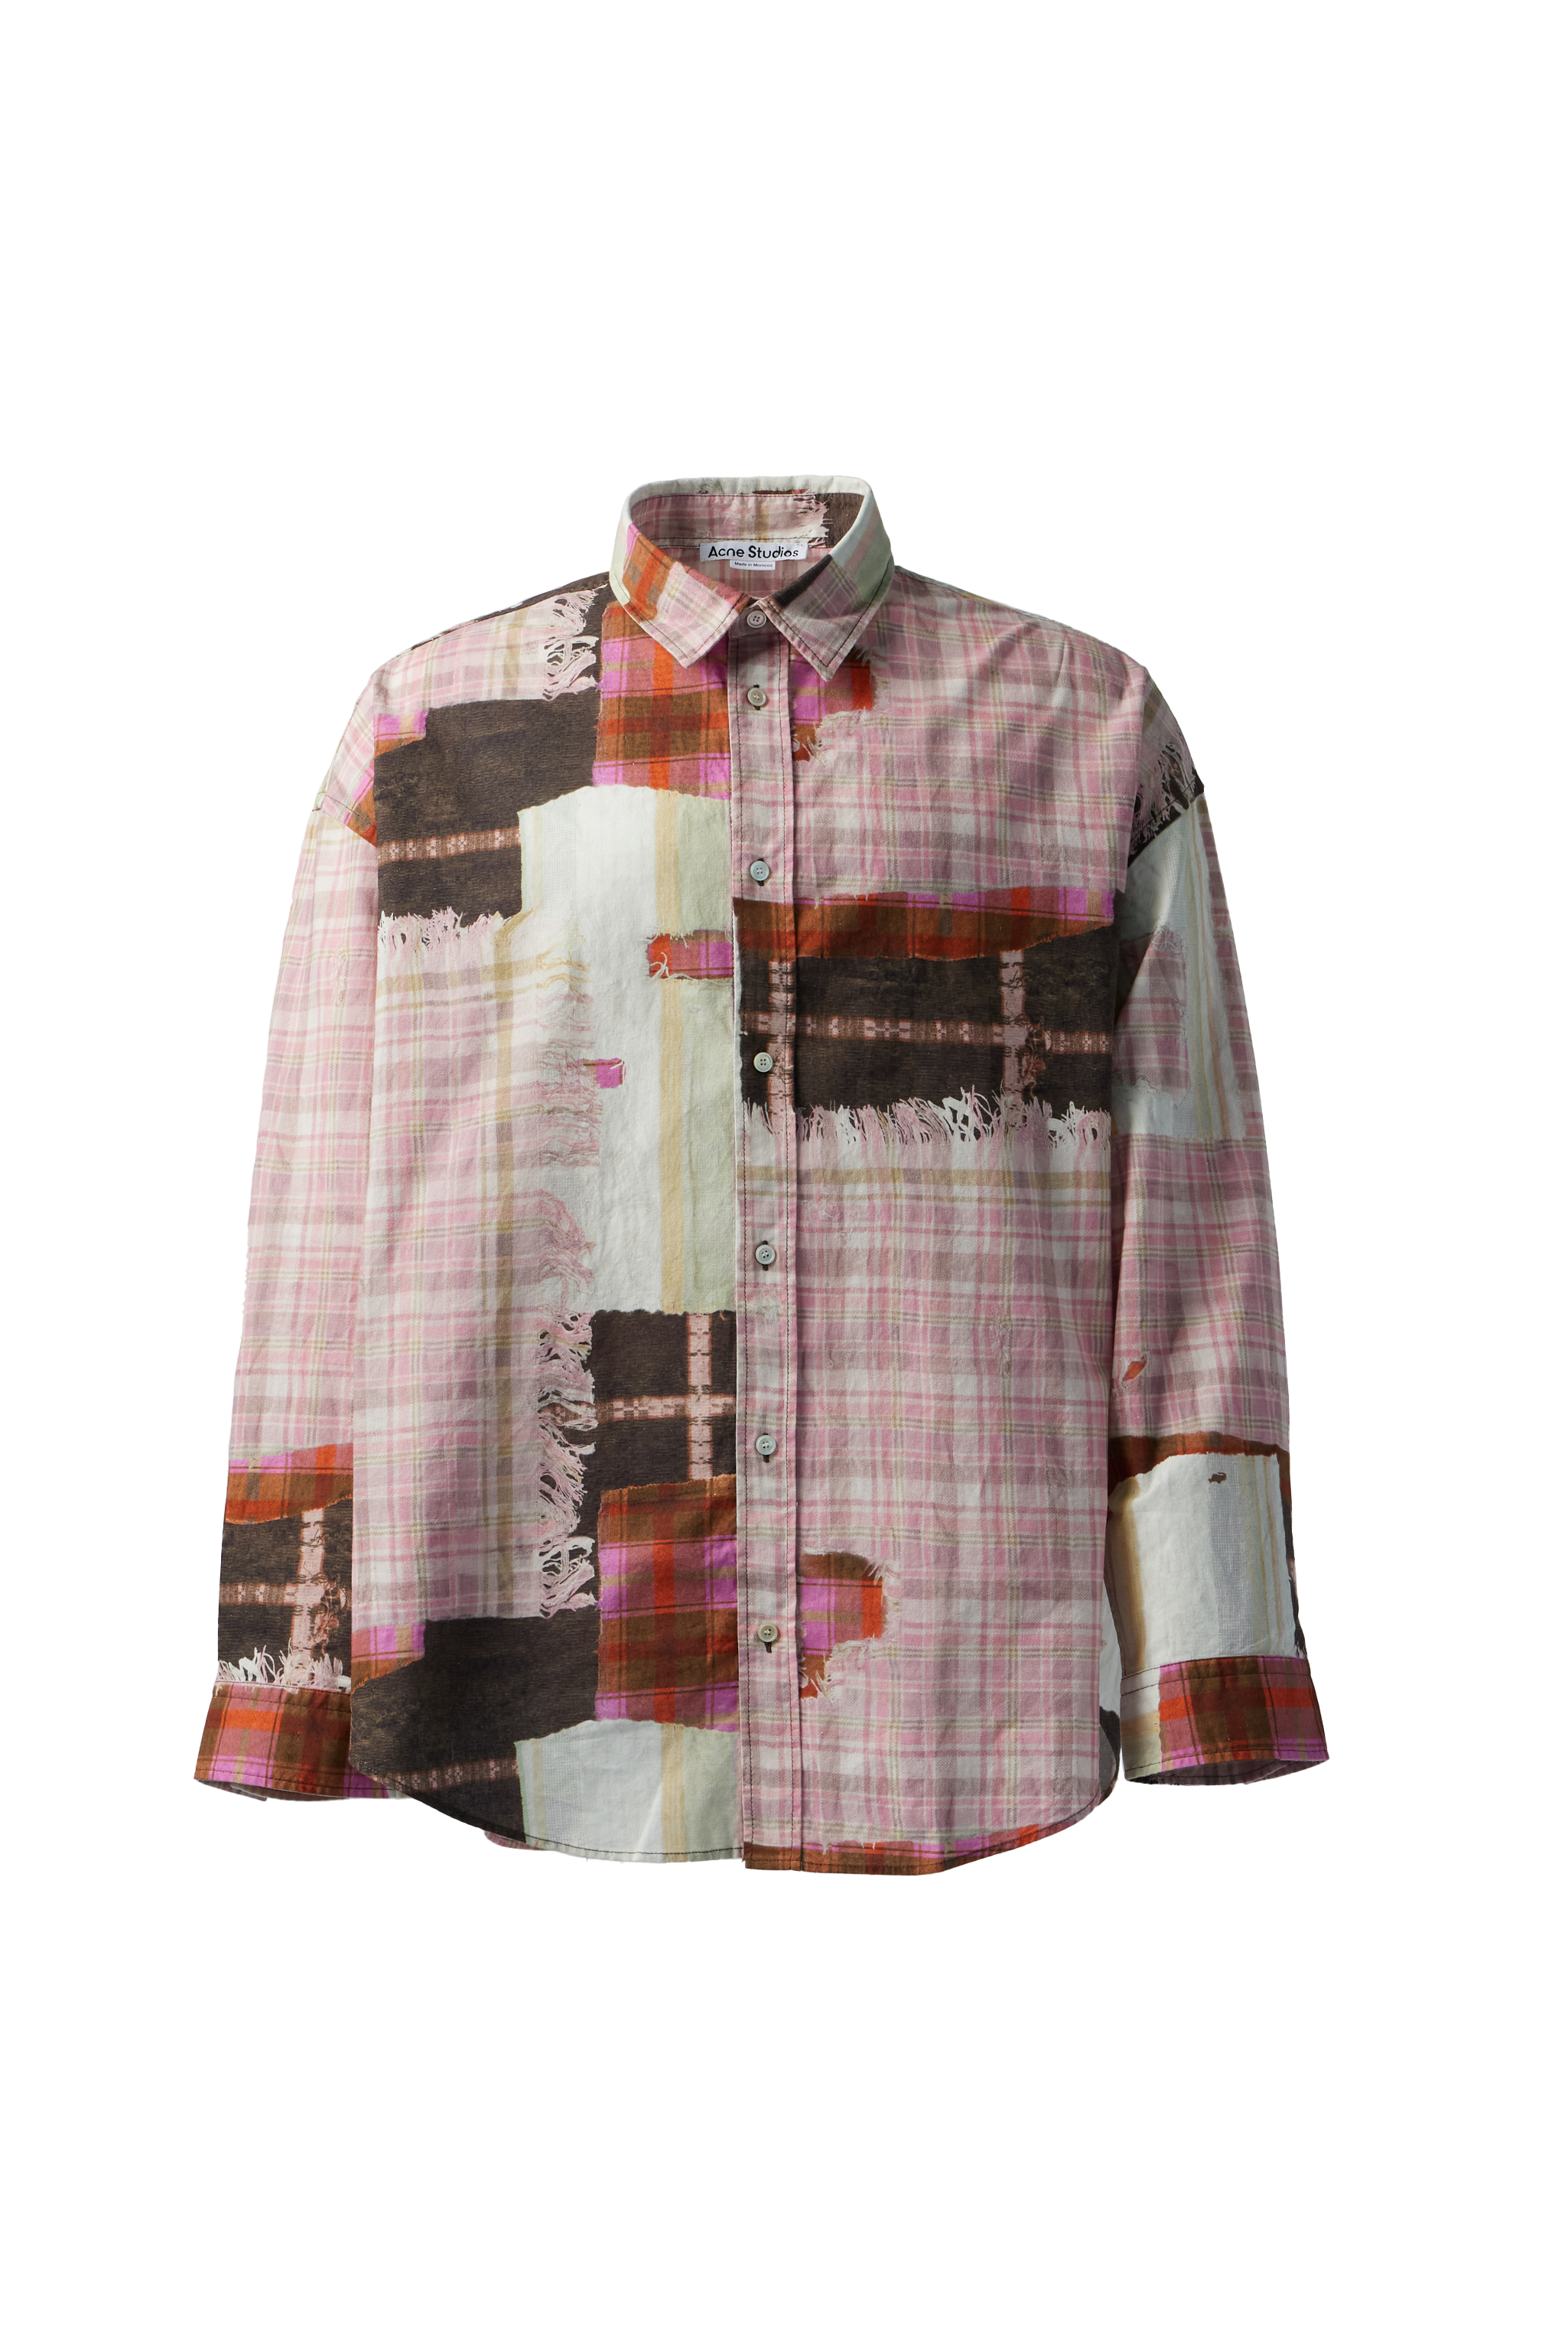 ACNE STUDIOS - Patchwork Printed Shirt product image